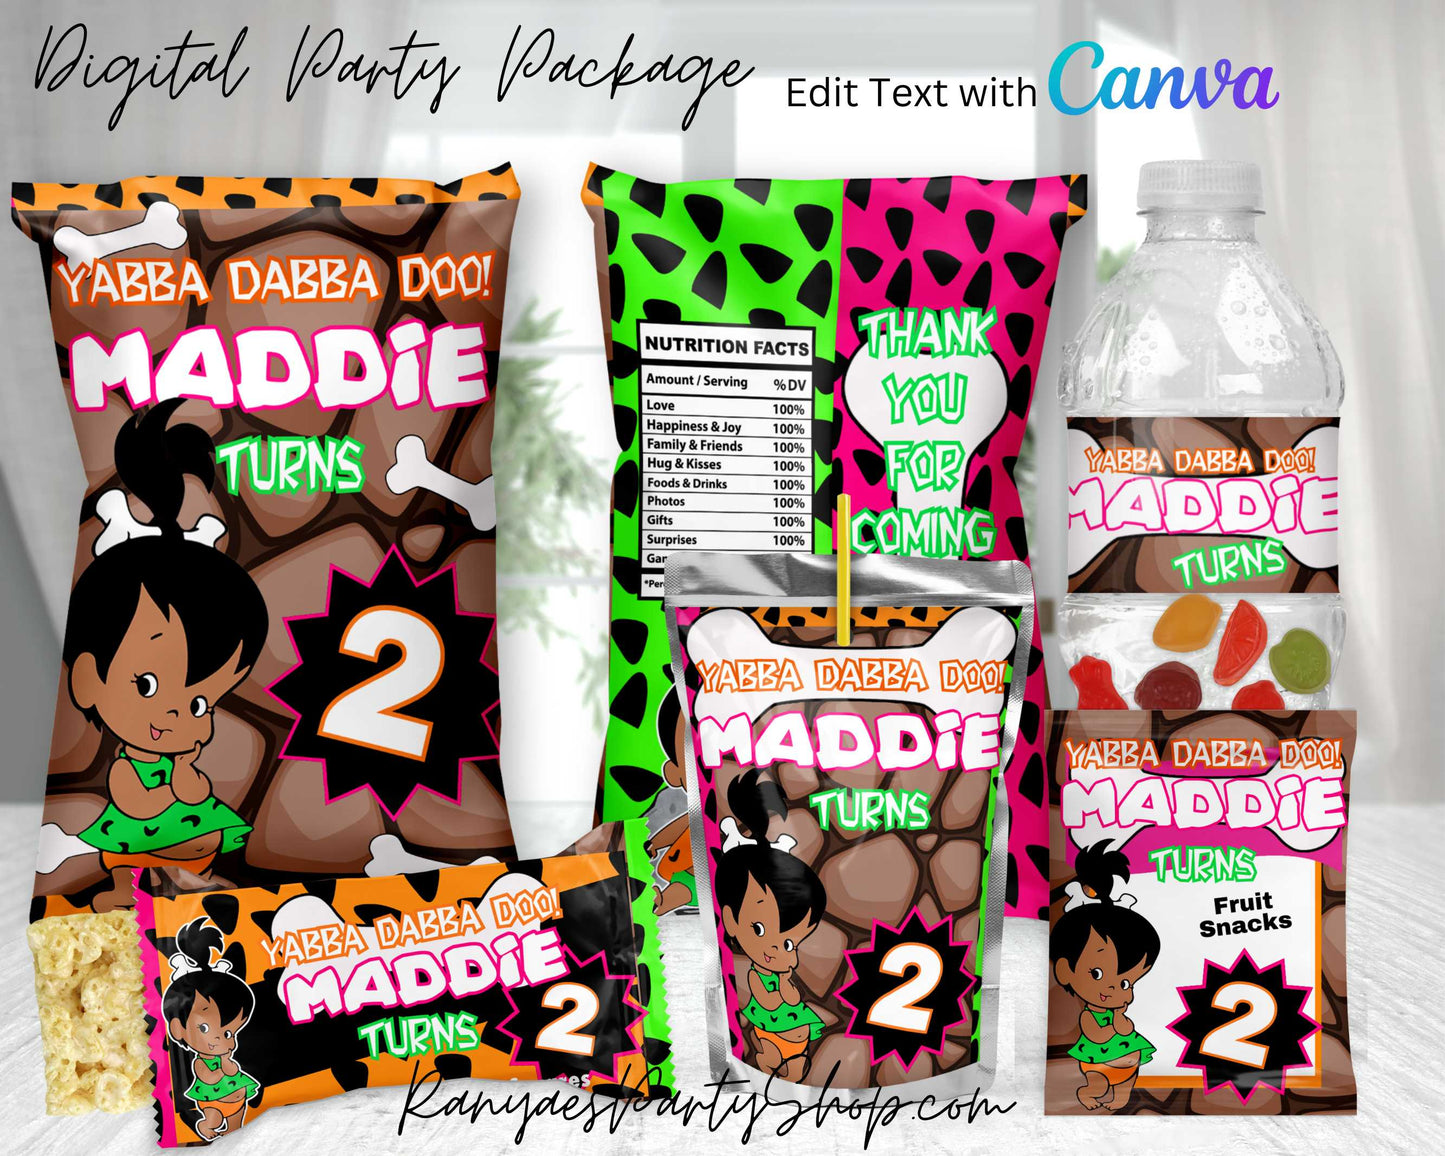 African American Pebbles Digital Party Package | Edit Text with Canva | You Edit | You Save | You Download | You Print | Digital File Only